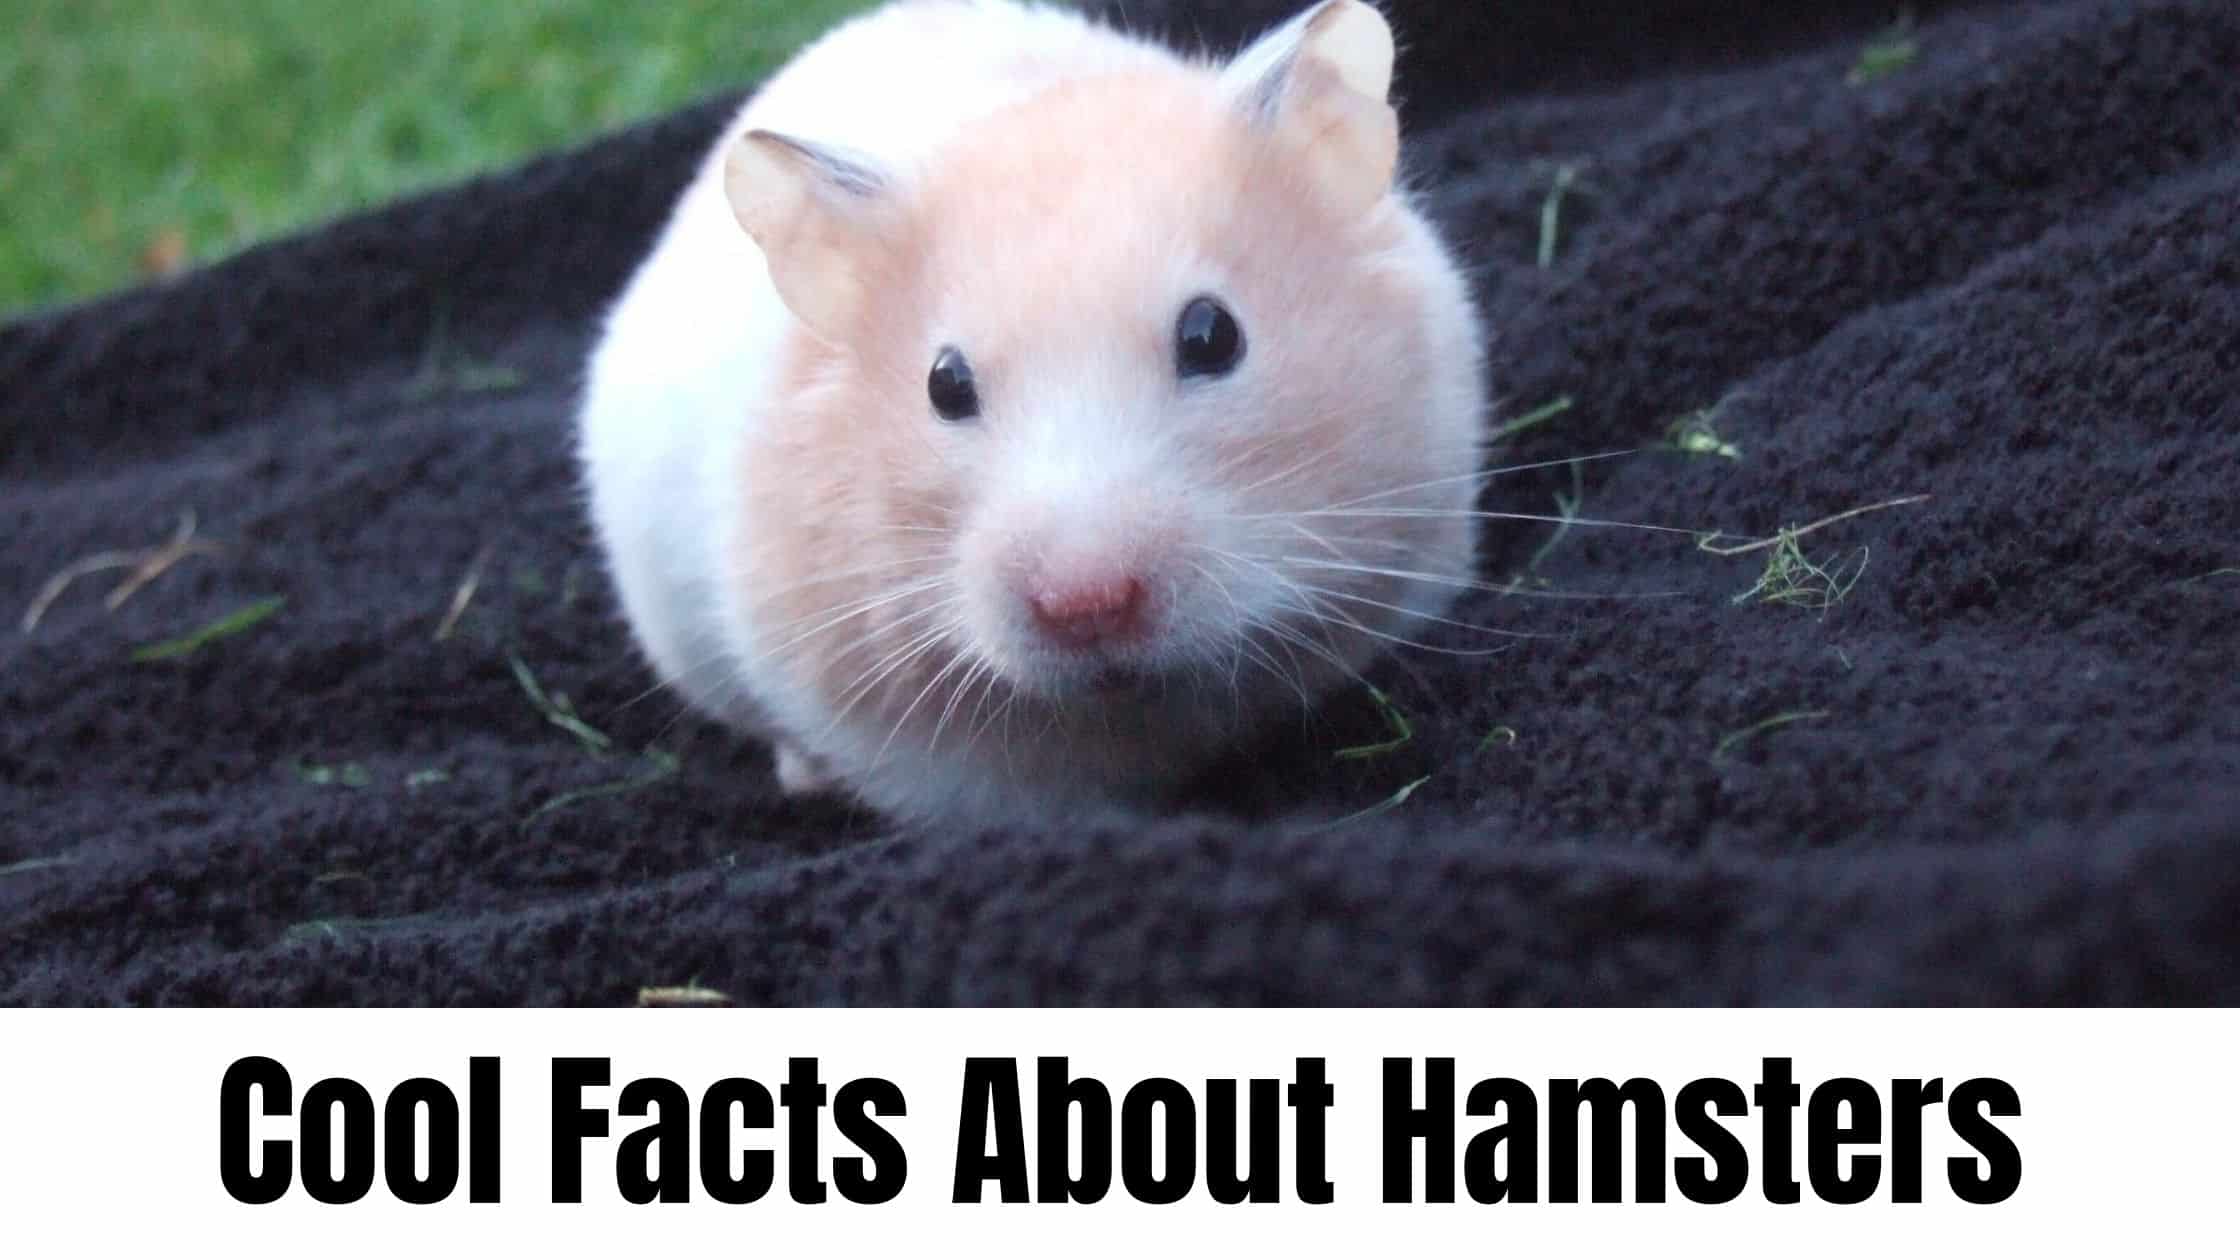 Facts About Hamsters